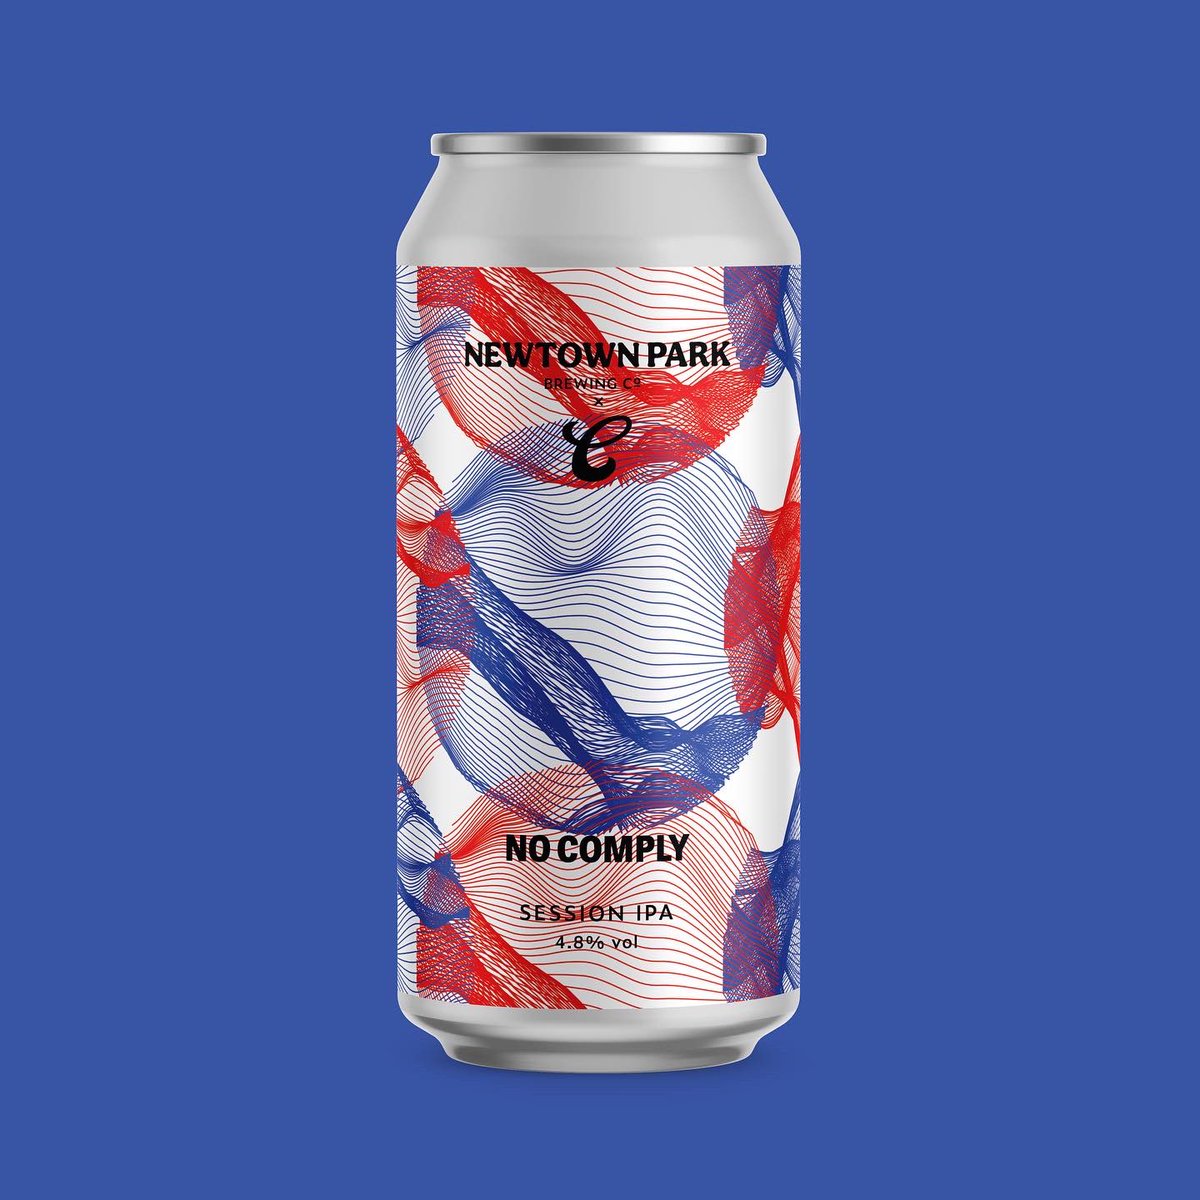 Screeching back into the lineup like a power slide on fresh concrete, 𝙉𝙊 𝘾𝙊𝙈𝙋𝙇𝙔 returns! With the recent news about the brewery you’ll wanna get your skates on before these cans ride off in to the sunset 🌅